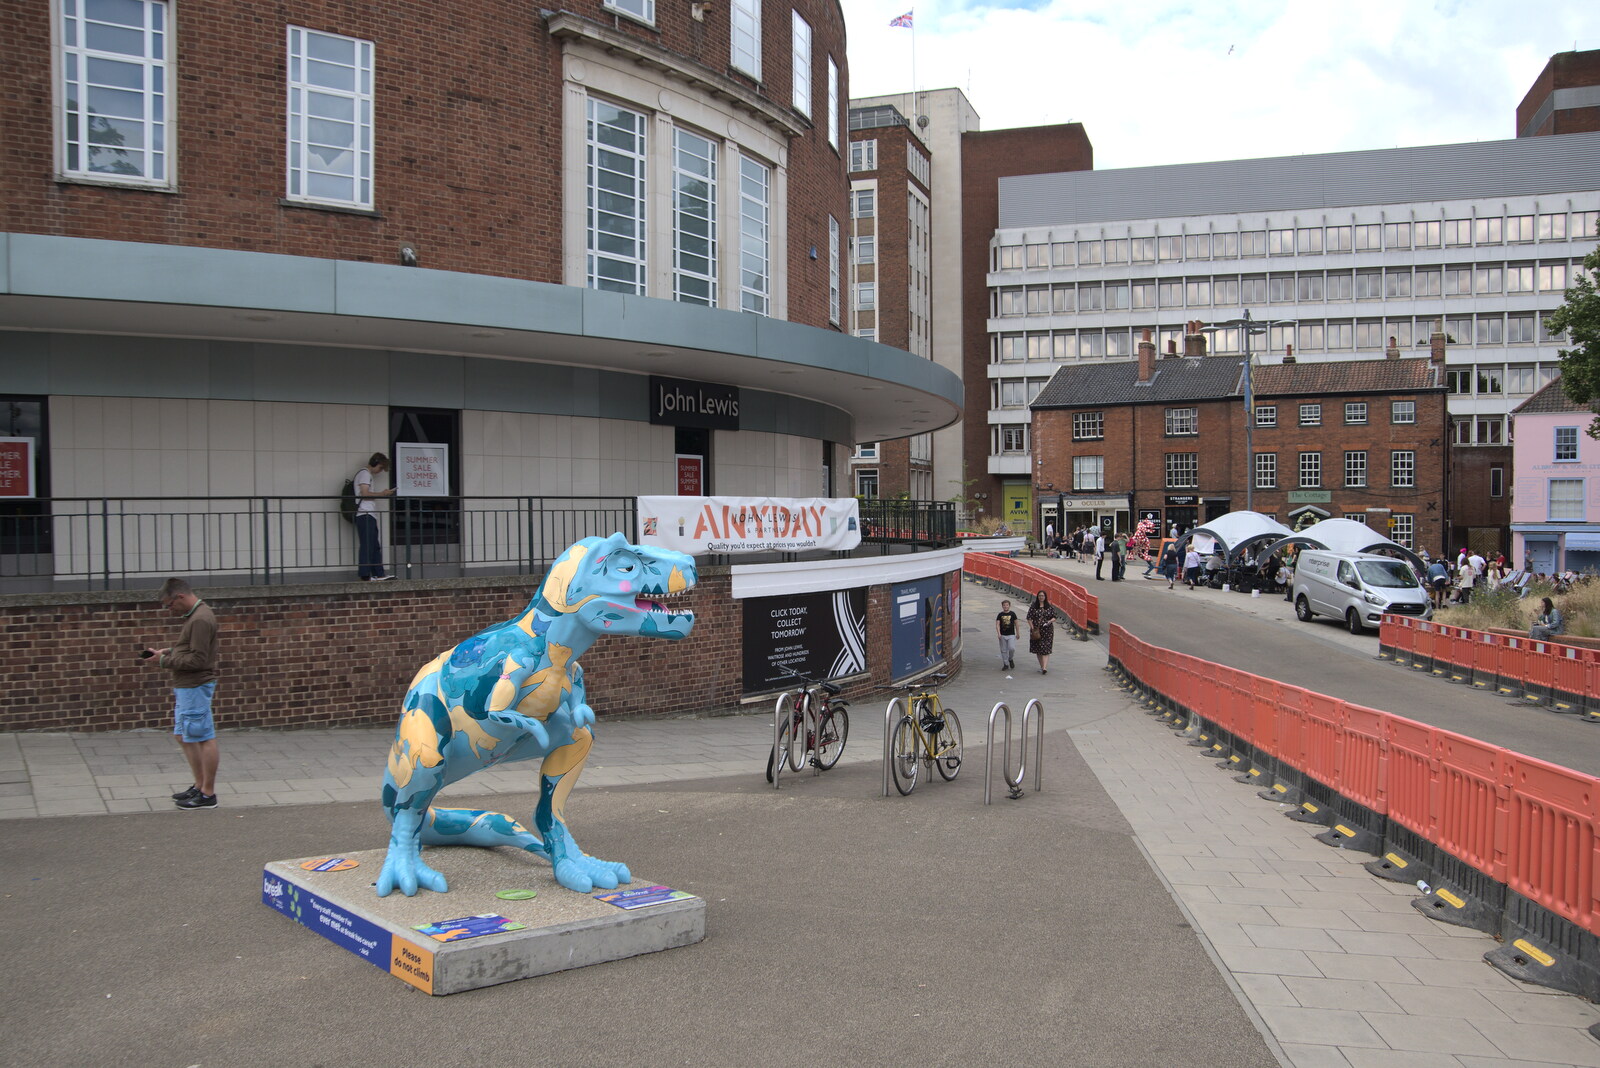 Another dino, outside John Lewis from The Lord Mayor's Procession, Norwich, Norfolk - 2nd July 2022